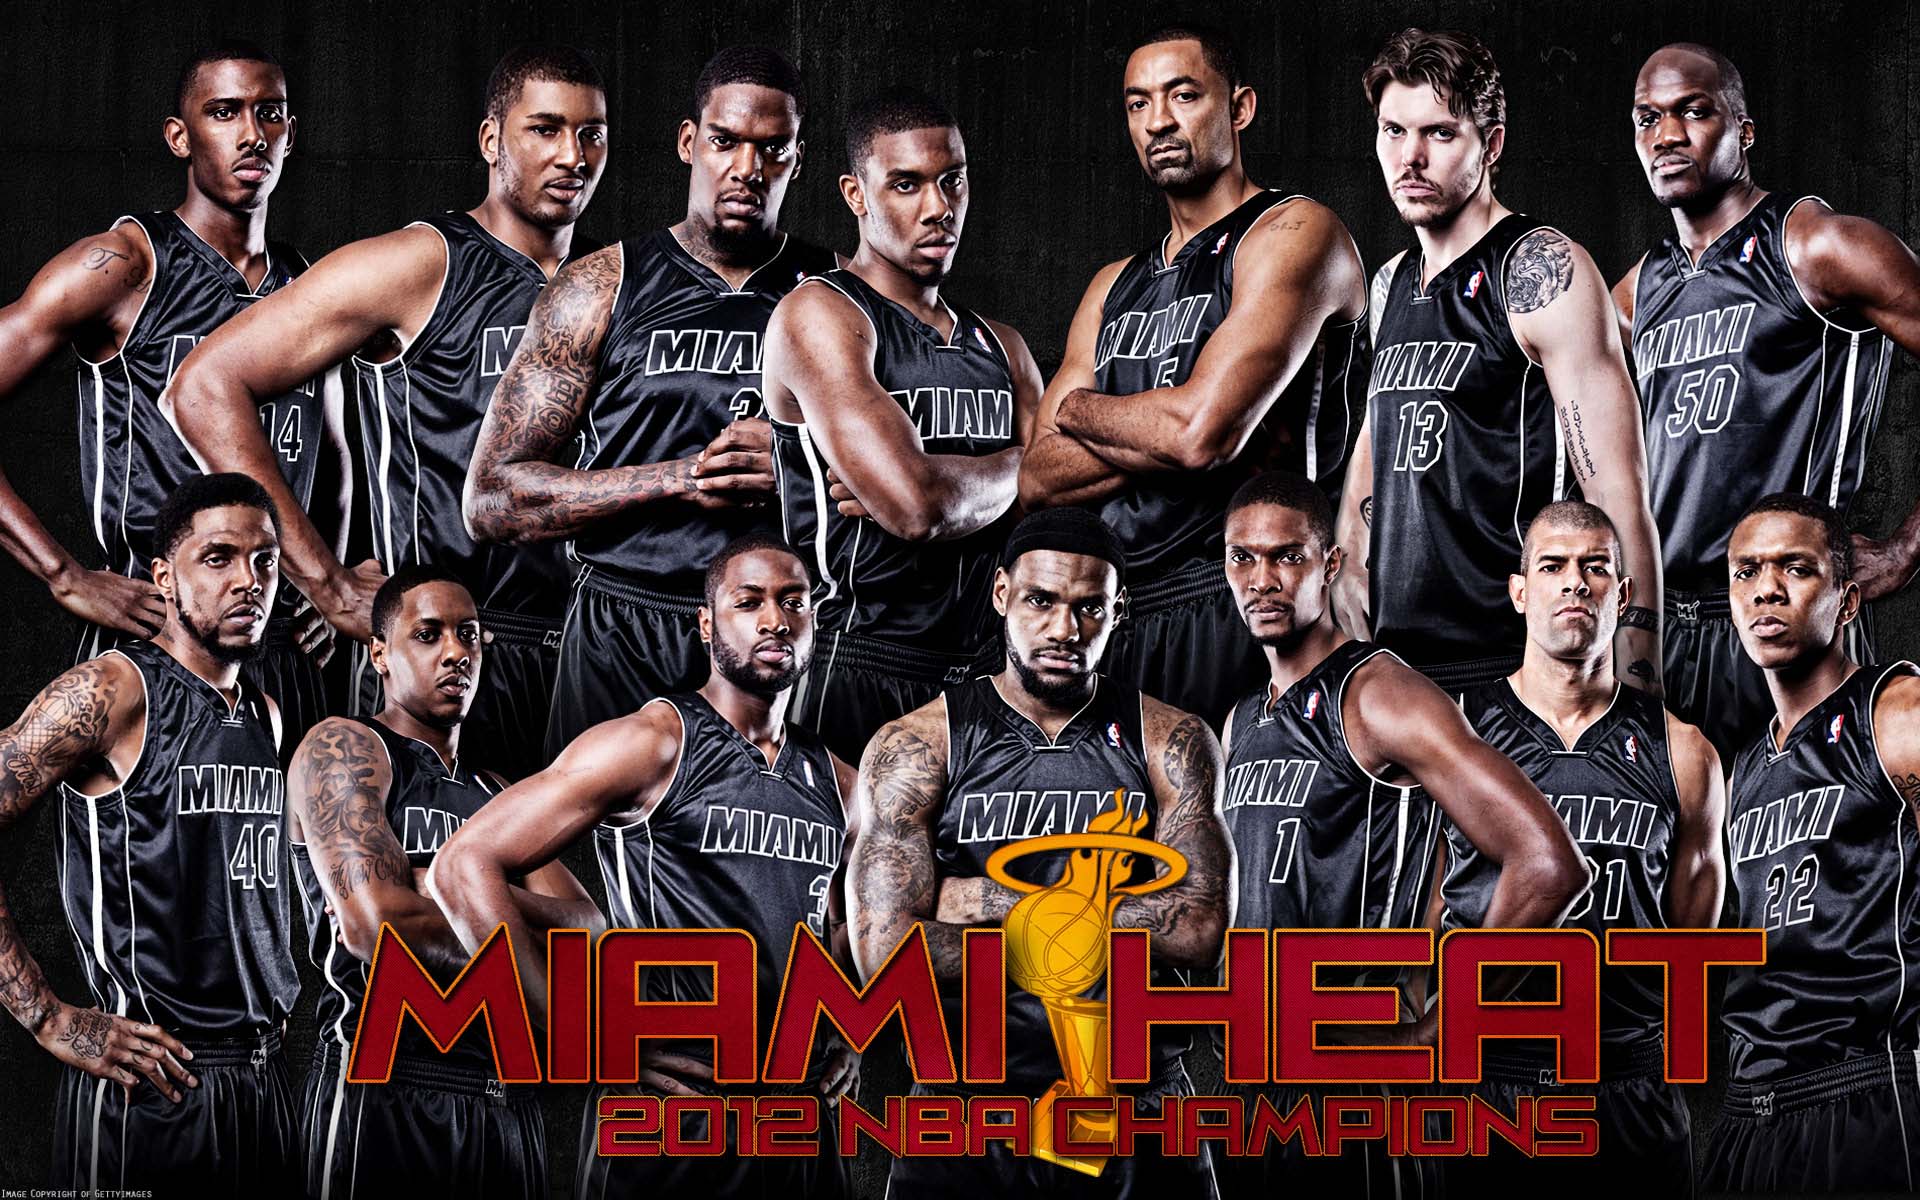 The Heat Wallpaper. Free Picture Download For Android, Desktop